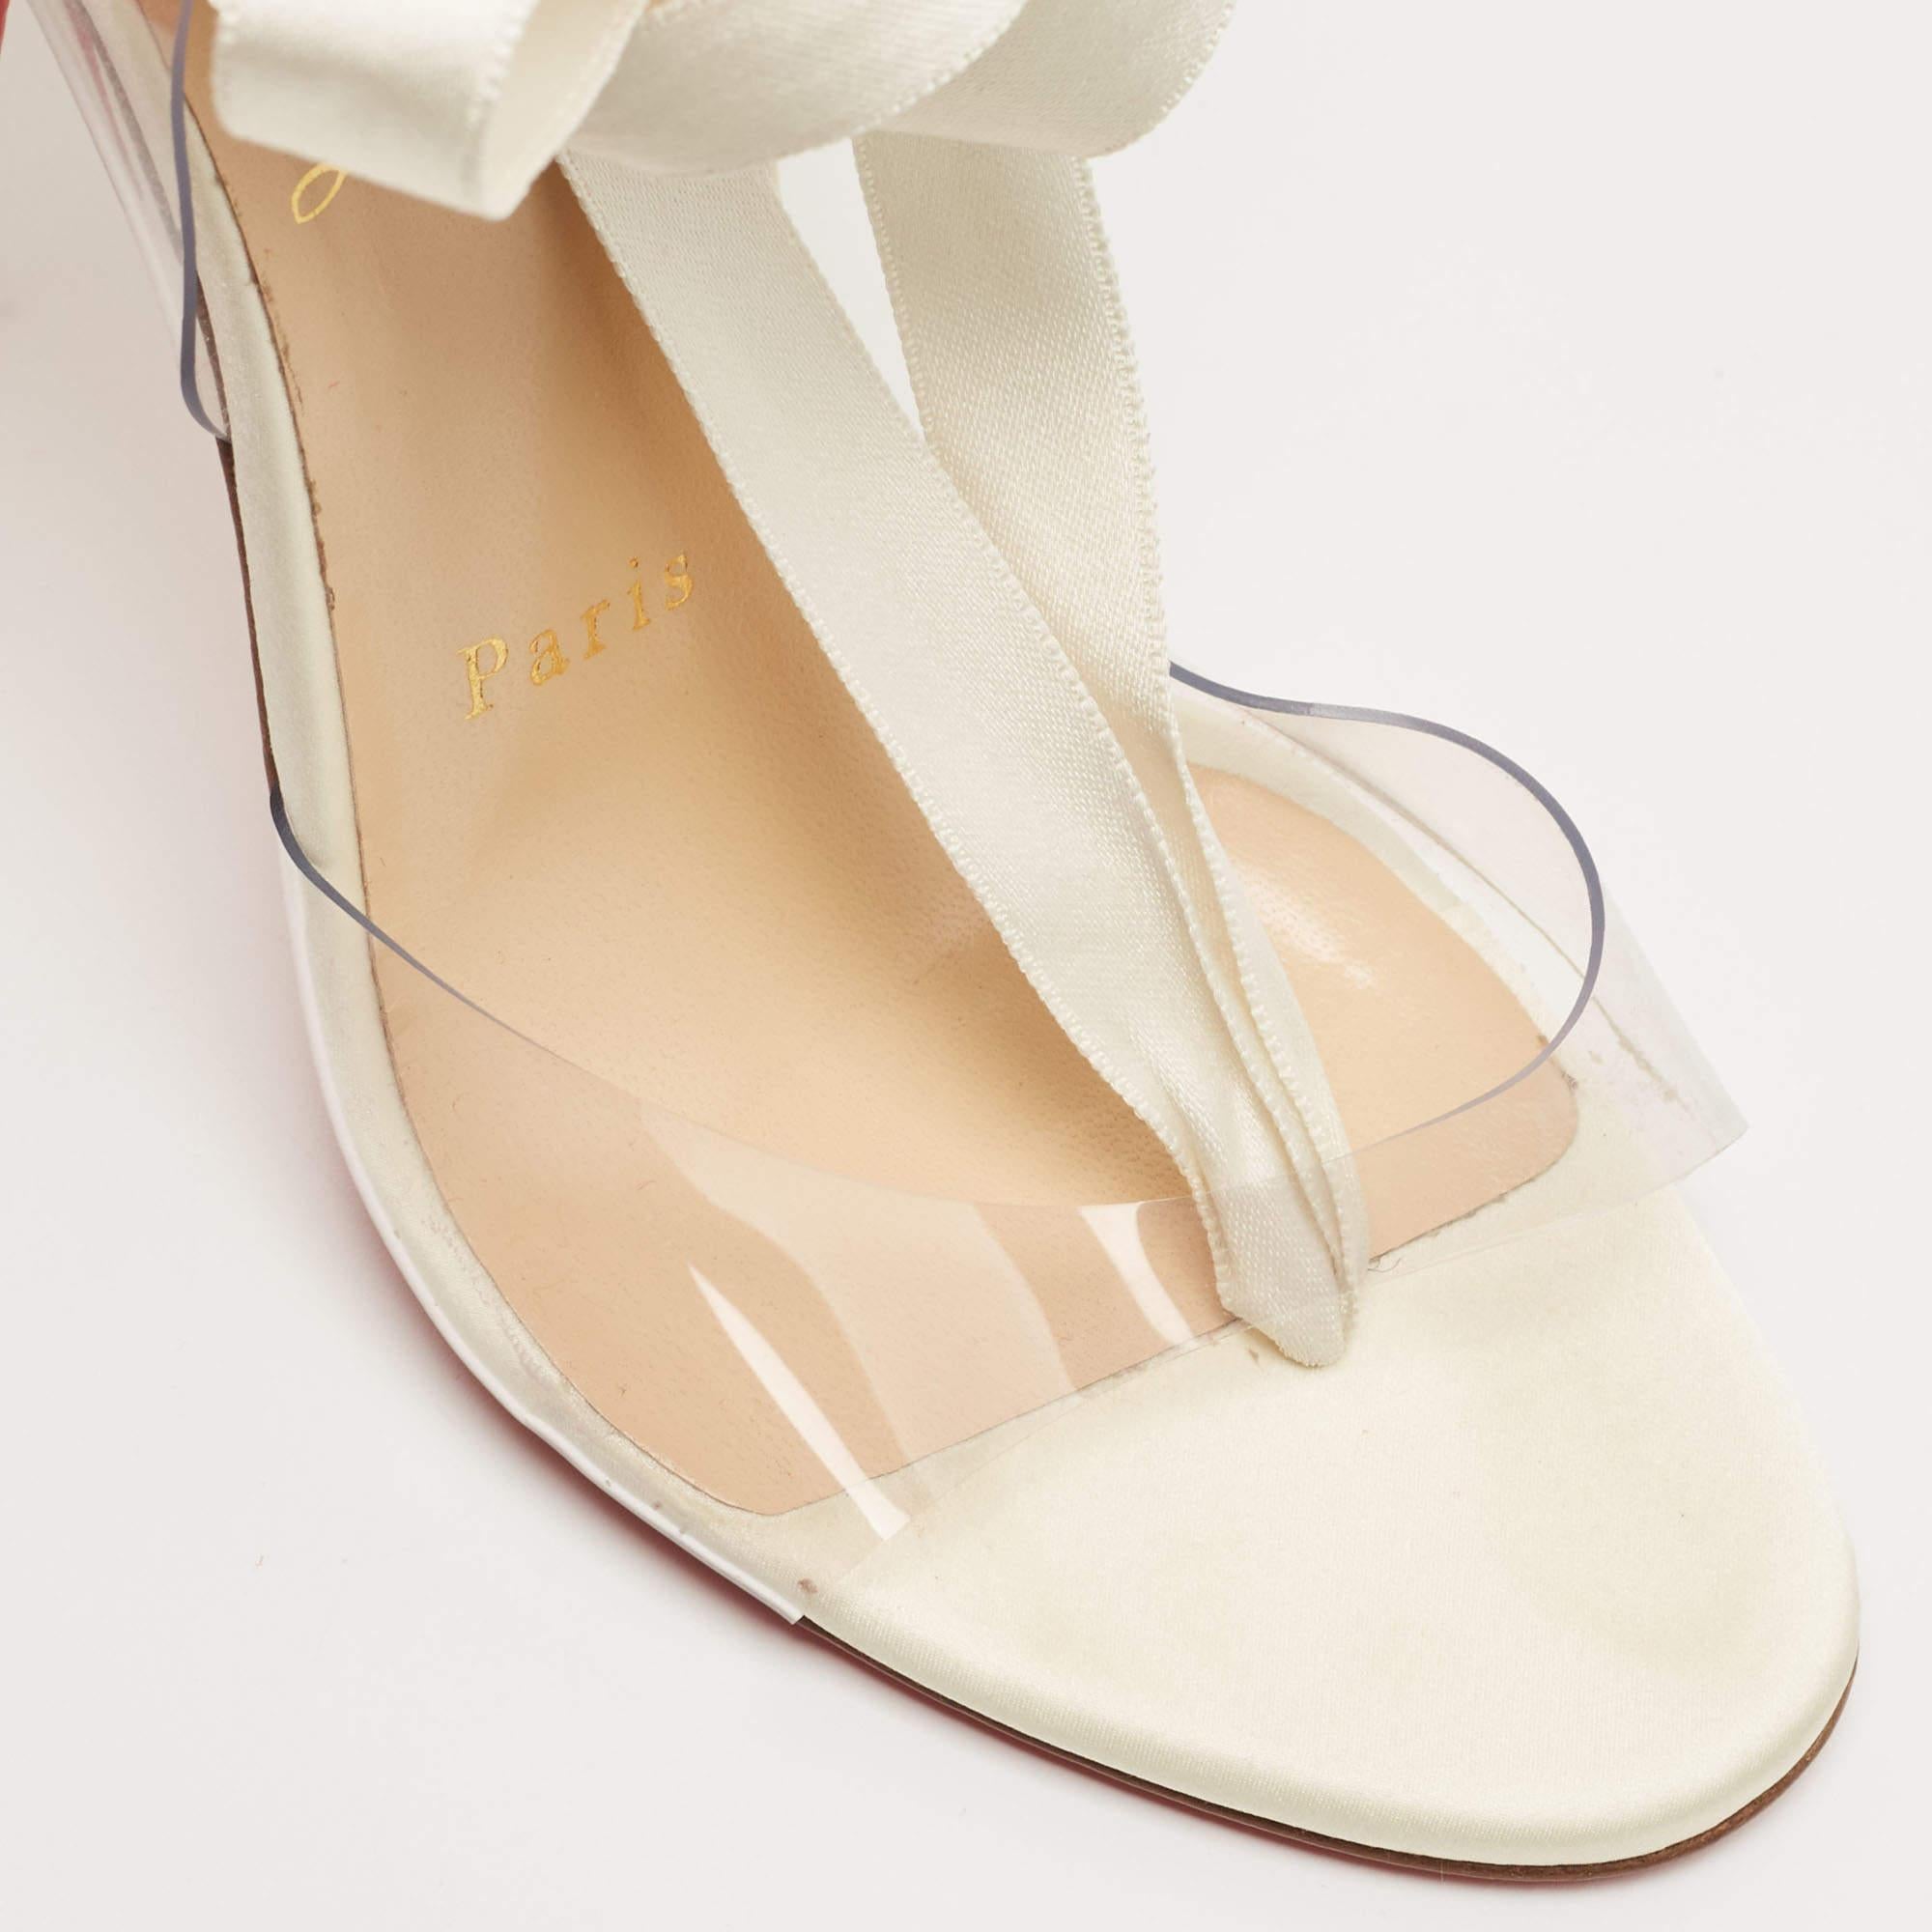 These white Christian Louboutin sandals will frame your feet in an elegant manner. Crafted from quality materials, they flaunt a classy display, comfortable insoles & durable heels.

Includes: Original Dustbag, Extra Heel Tips